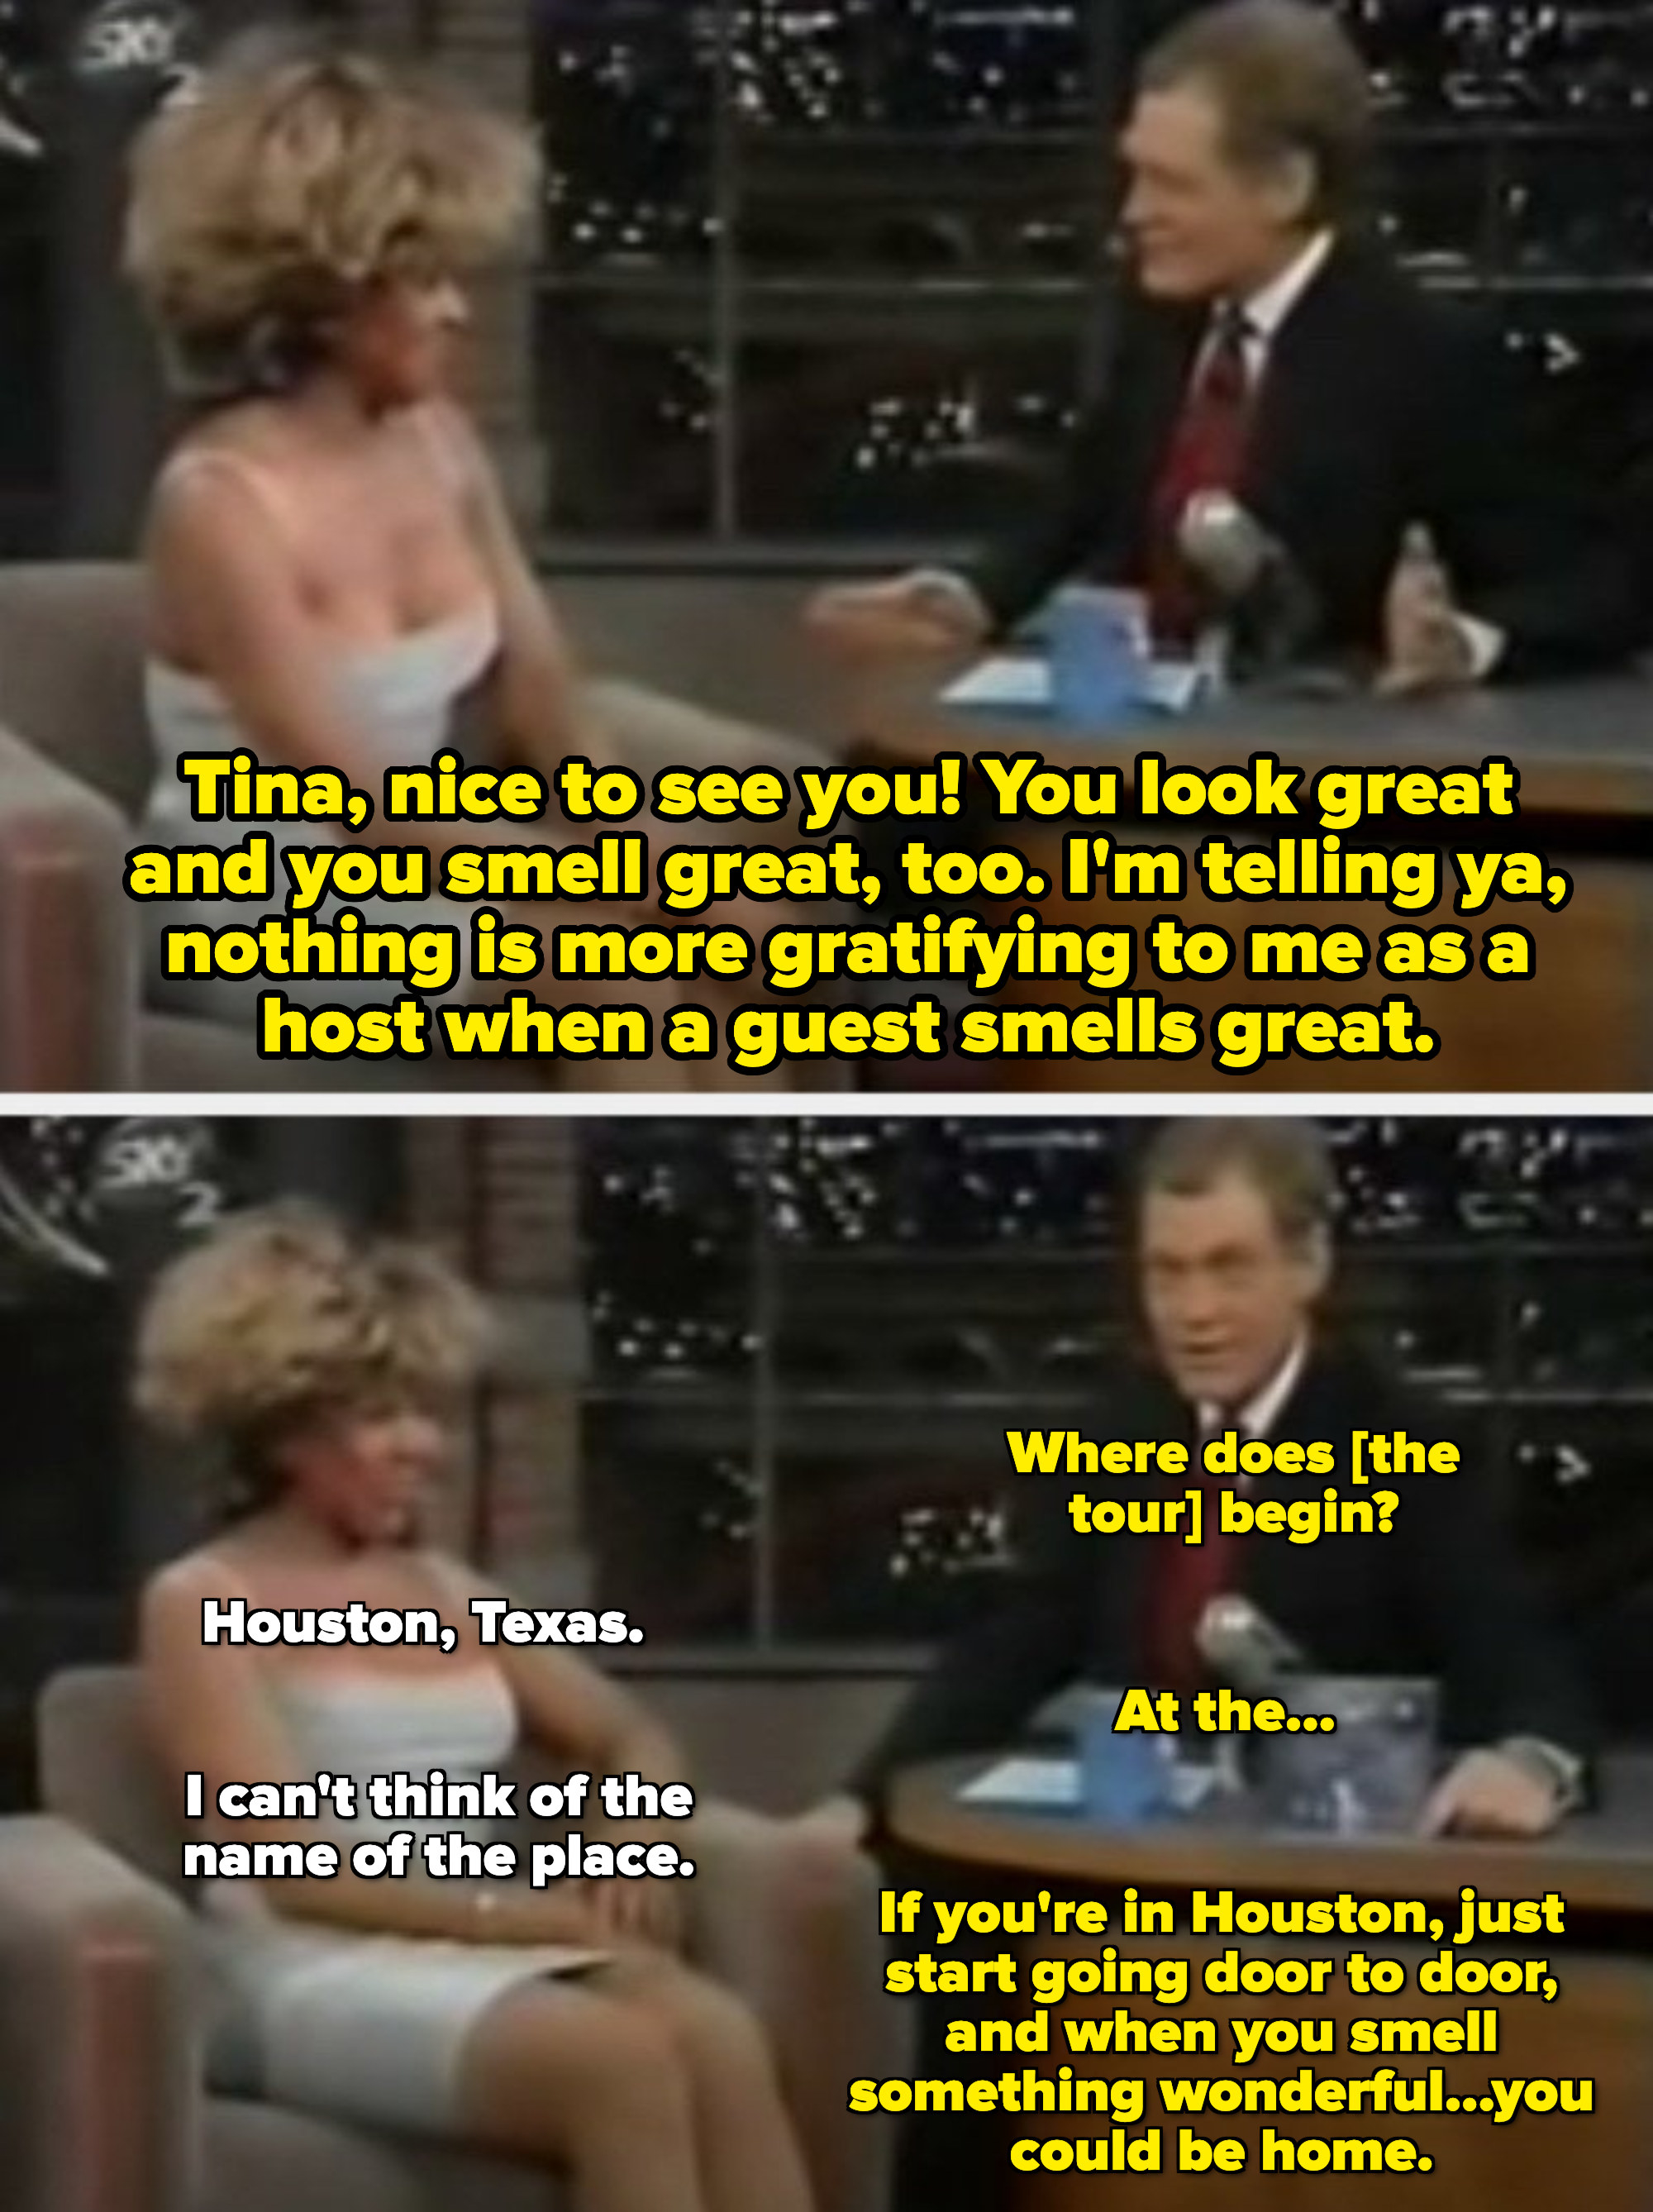 Letterman telling Tina Turner she smells great and that &quot;Nothing is more gratifying to me as a host when a guest smells great&quot;